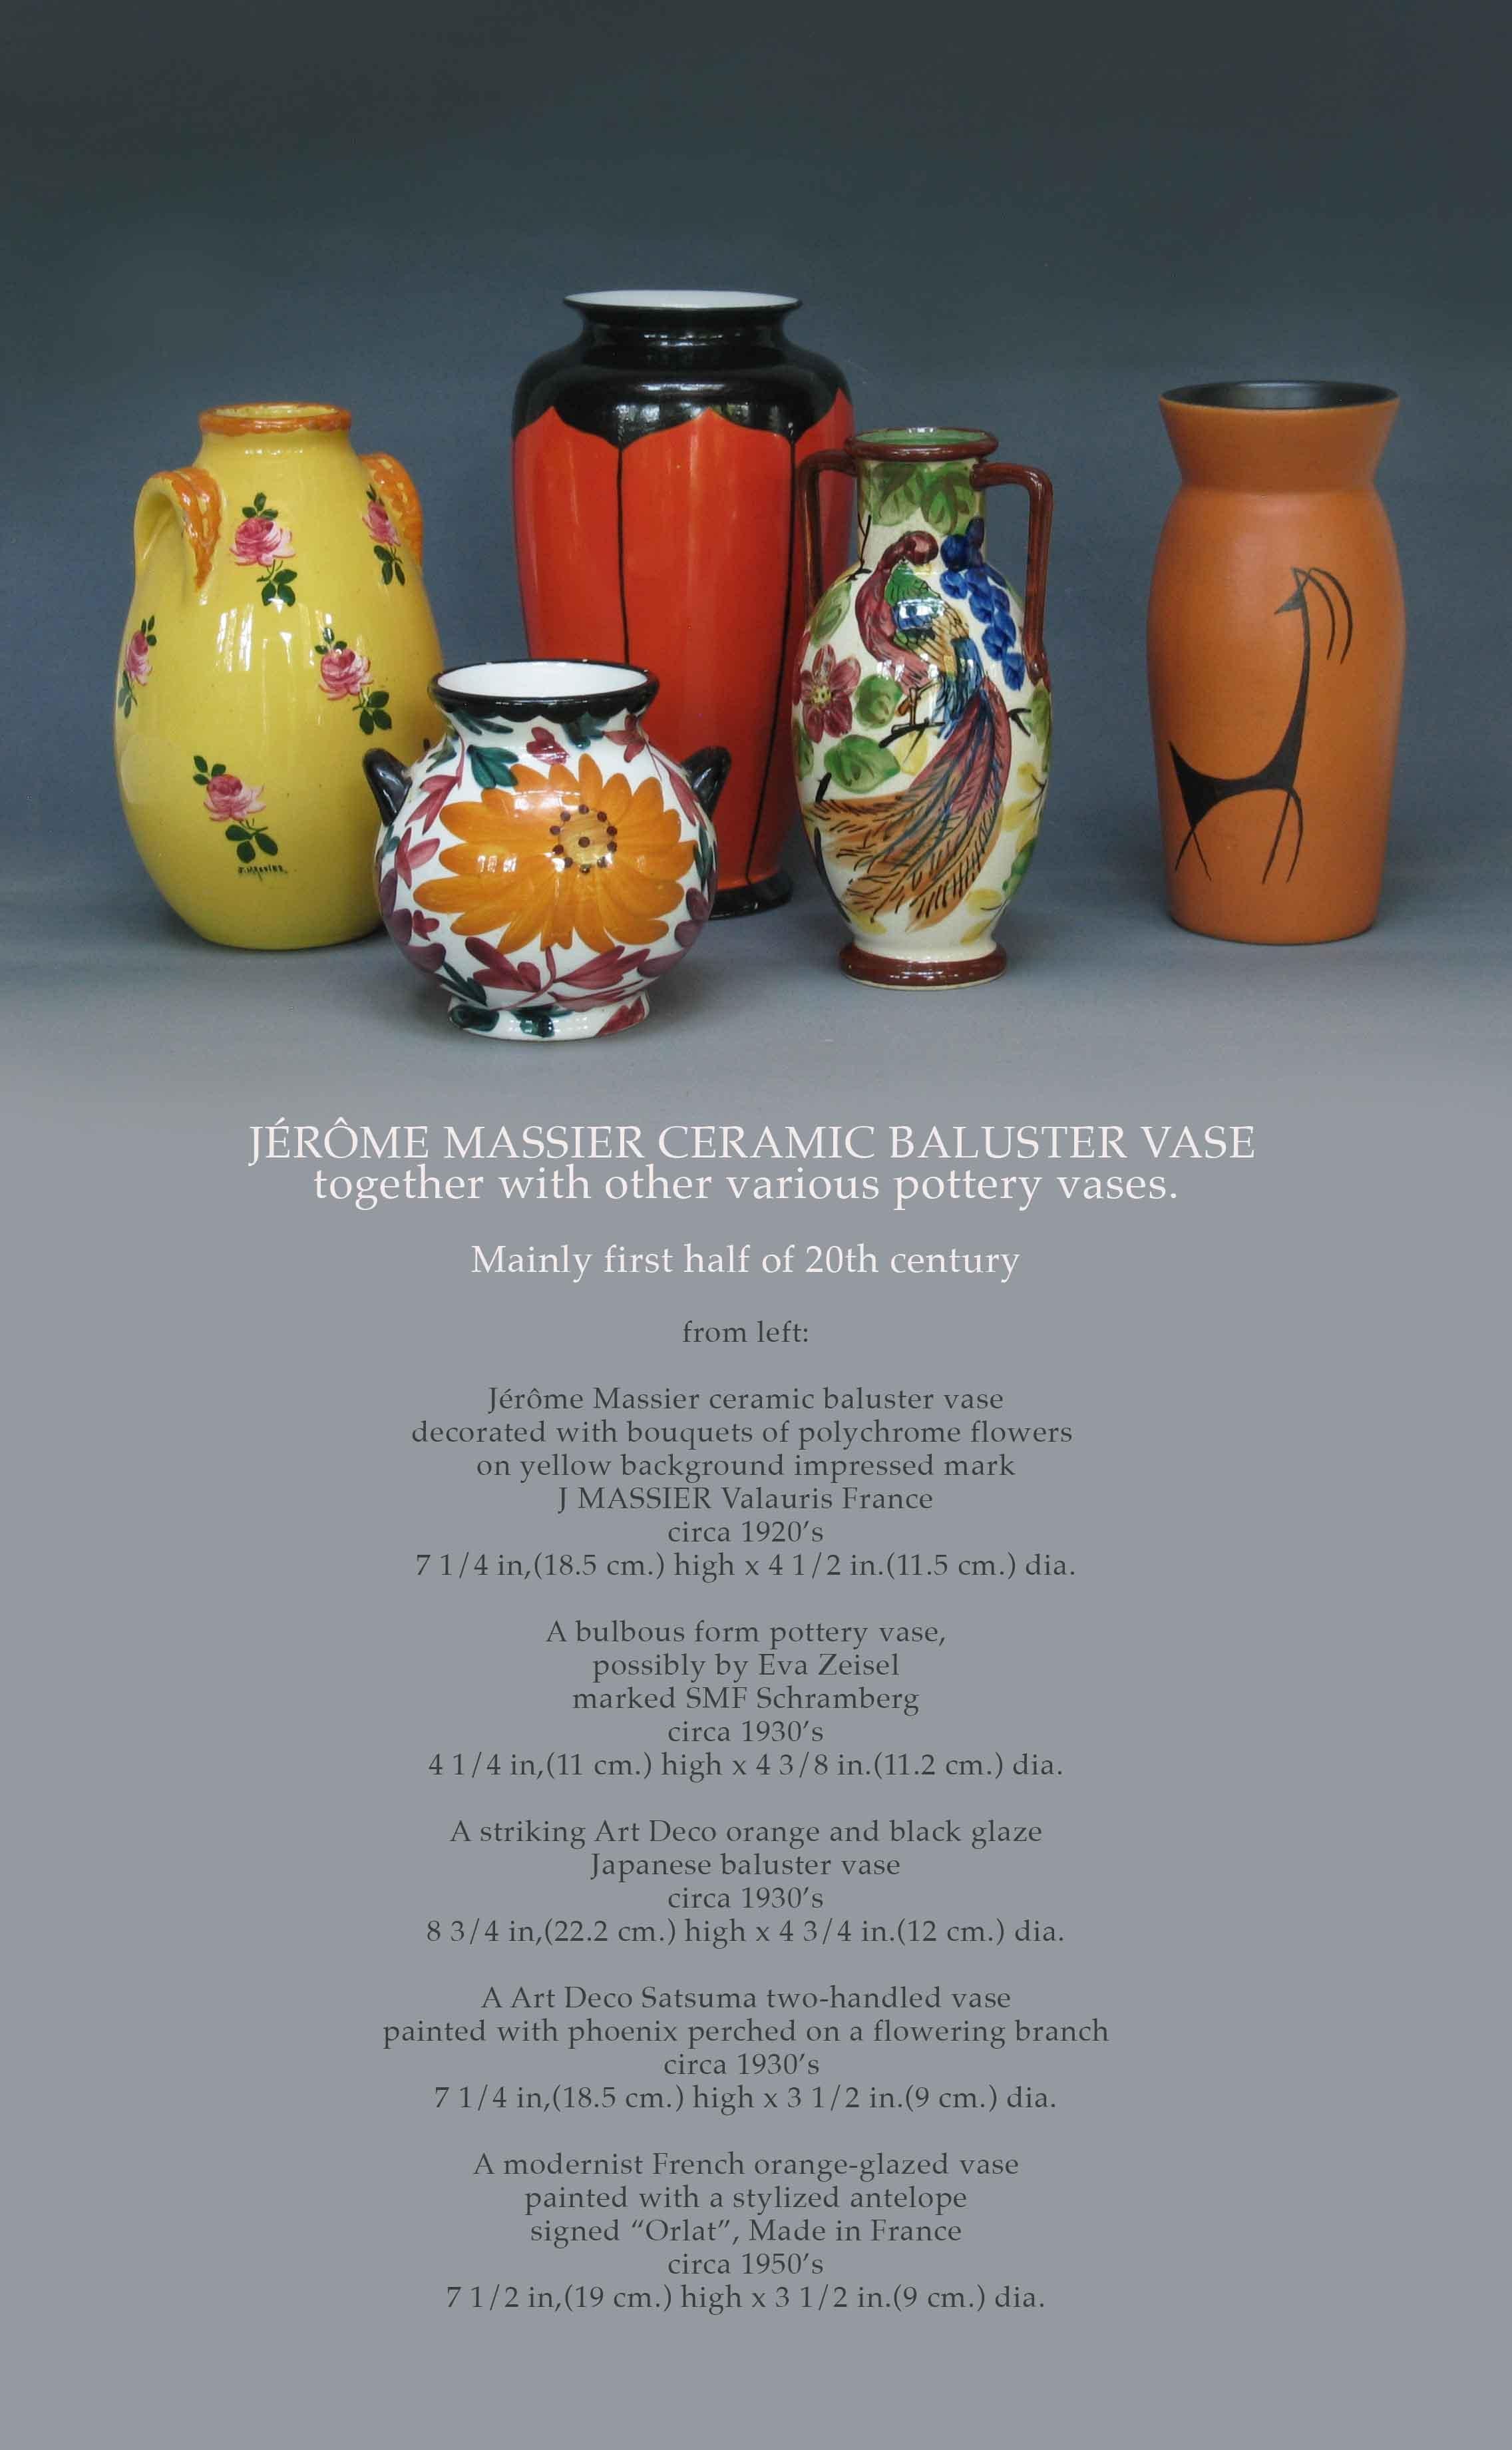 Jérôme Massier ceramic baluster vase
together with other various pottery vases.

Mainly first half of 20th century.

From Left:

Jérôme Massier ceramic baluster vase
decorated with bouquets of polychrome flowers
on yellow background impressed mark
J